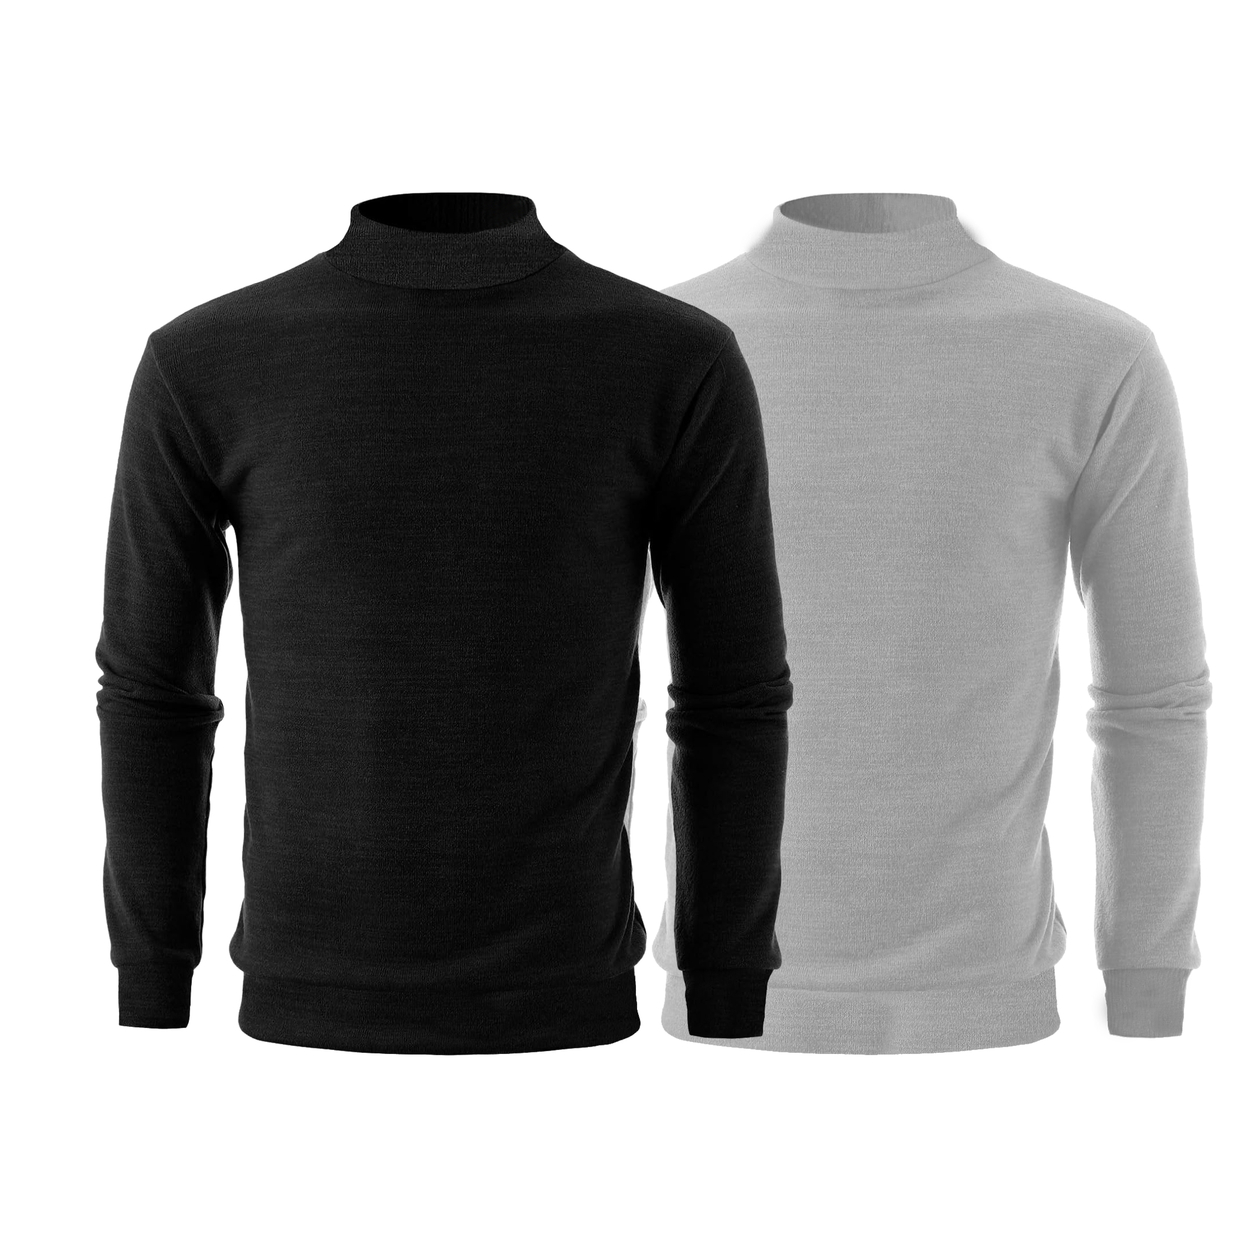 2-Pack: Men's Winter Warm Cozy Knit Slim Fit Mock Neck Sweater - White & Charcoal, Xx-large